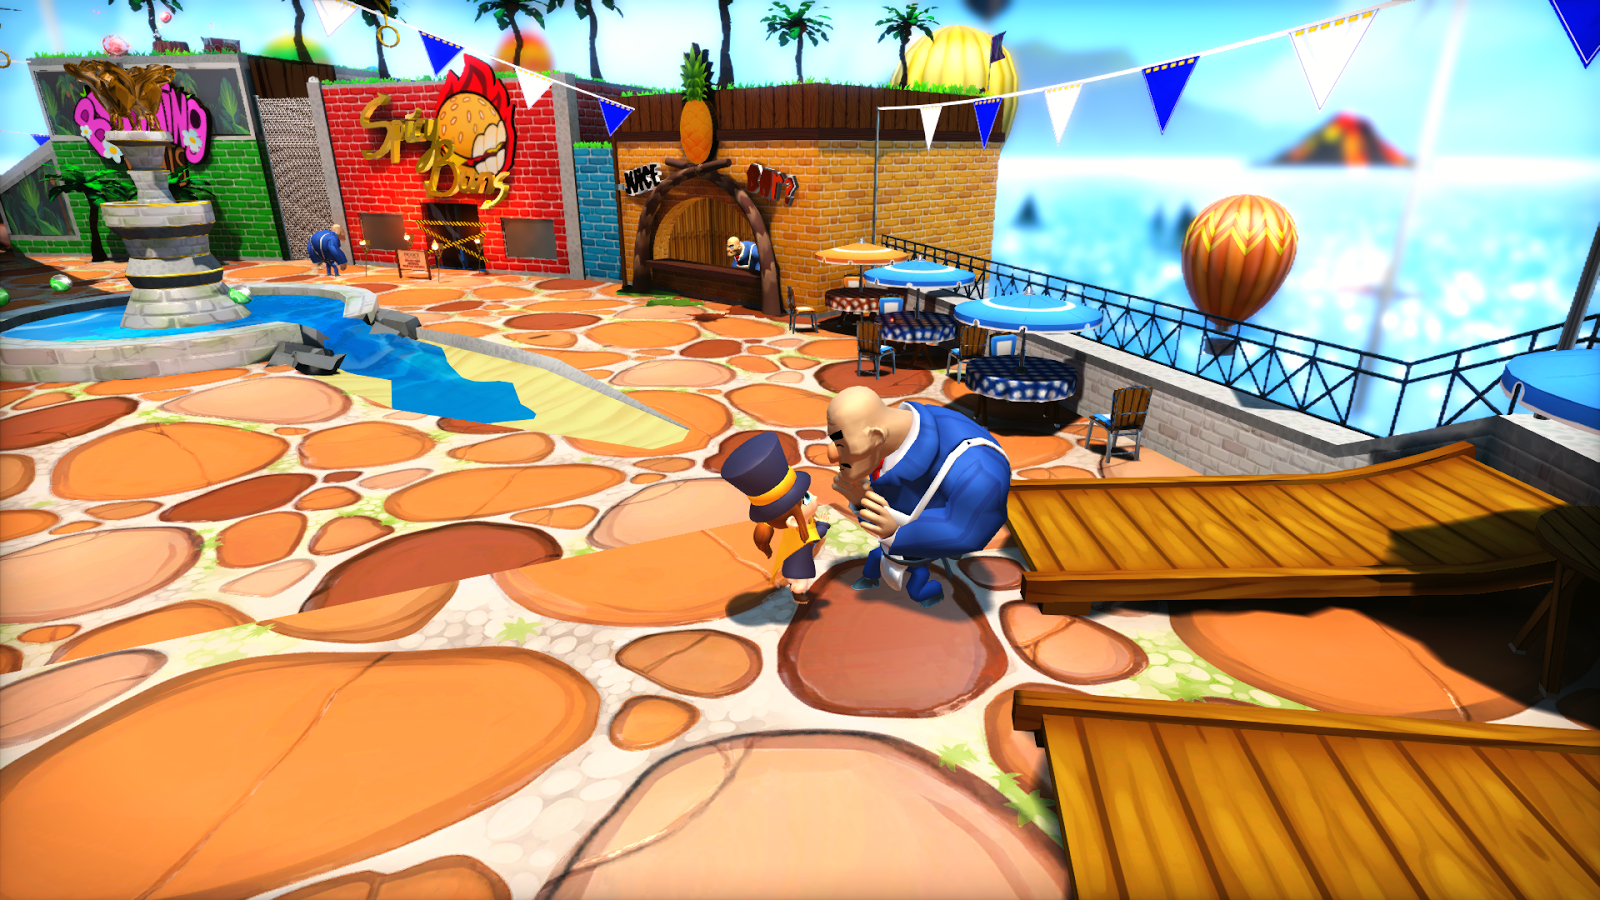 Game review: A Hat in Time — NewsAtomic